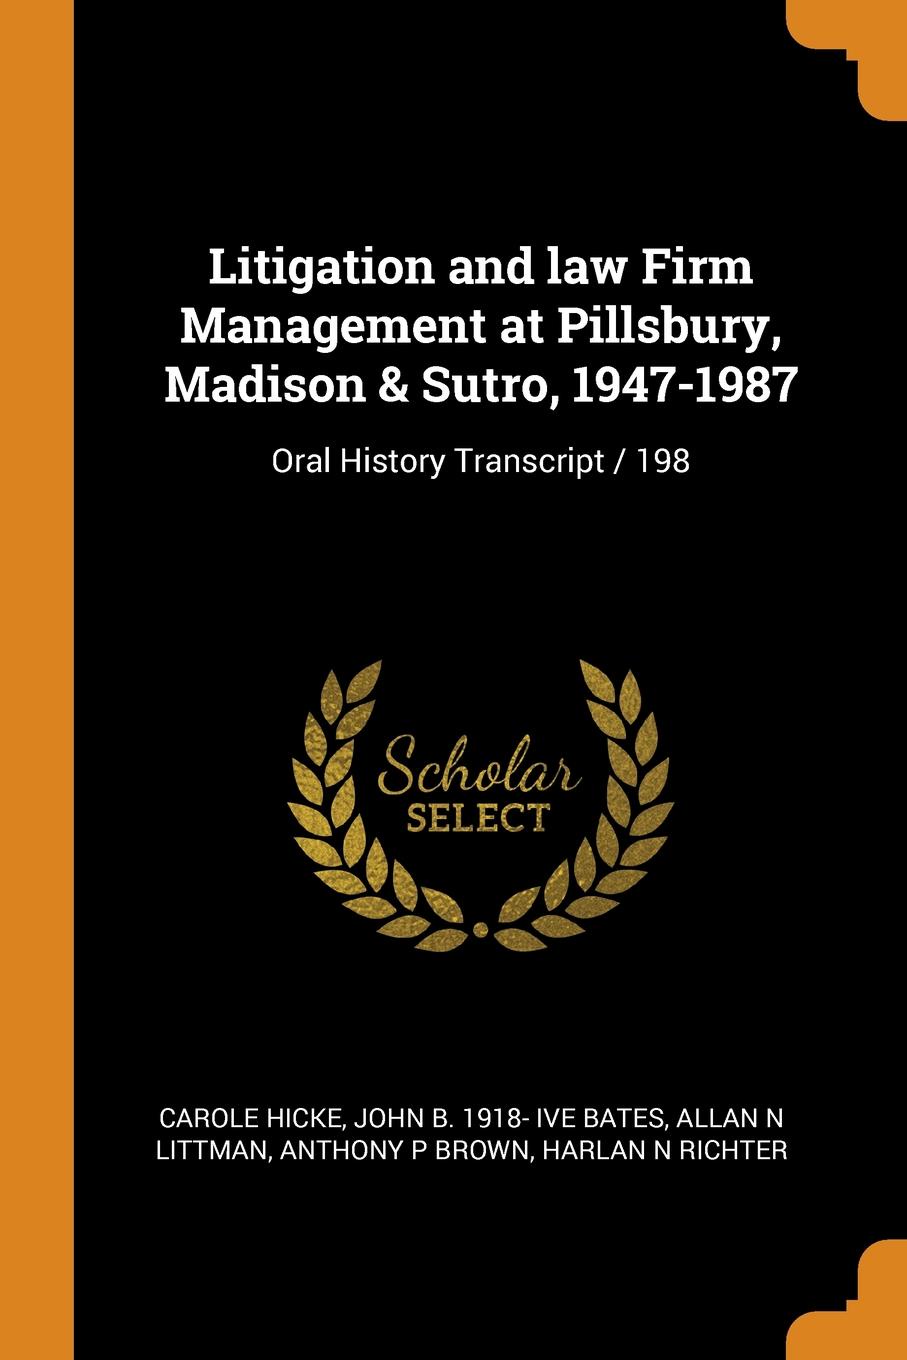 Litigation and law Firm Management at Pillsbury, Madison . Sutro, 1947-1987. Oral History Transcript / 198